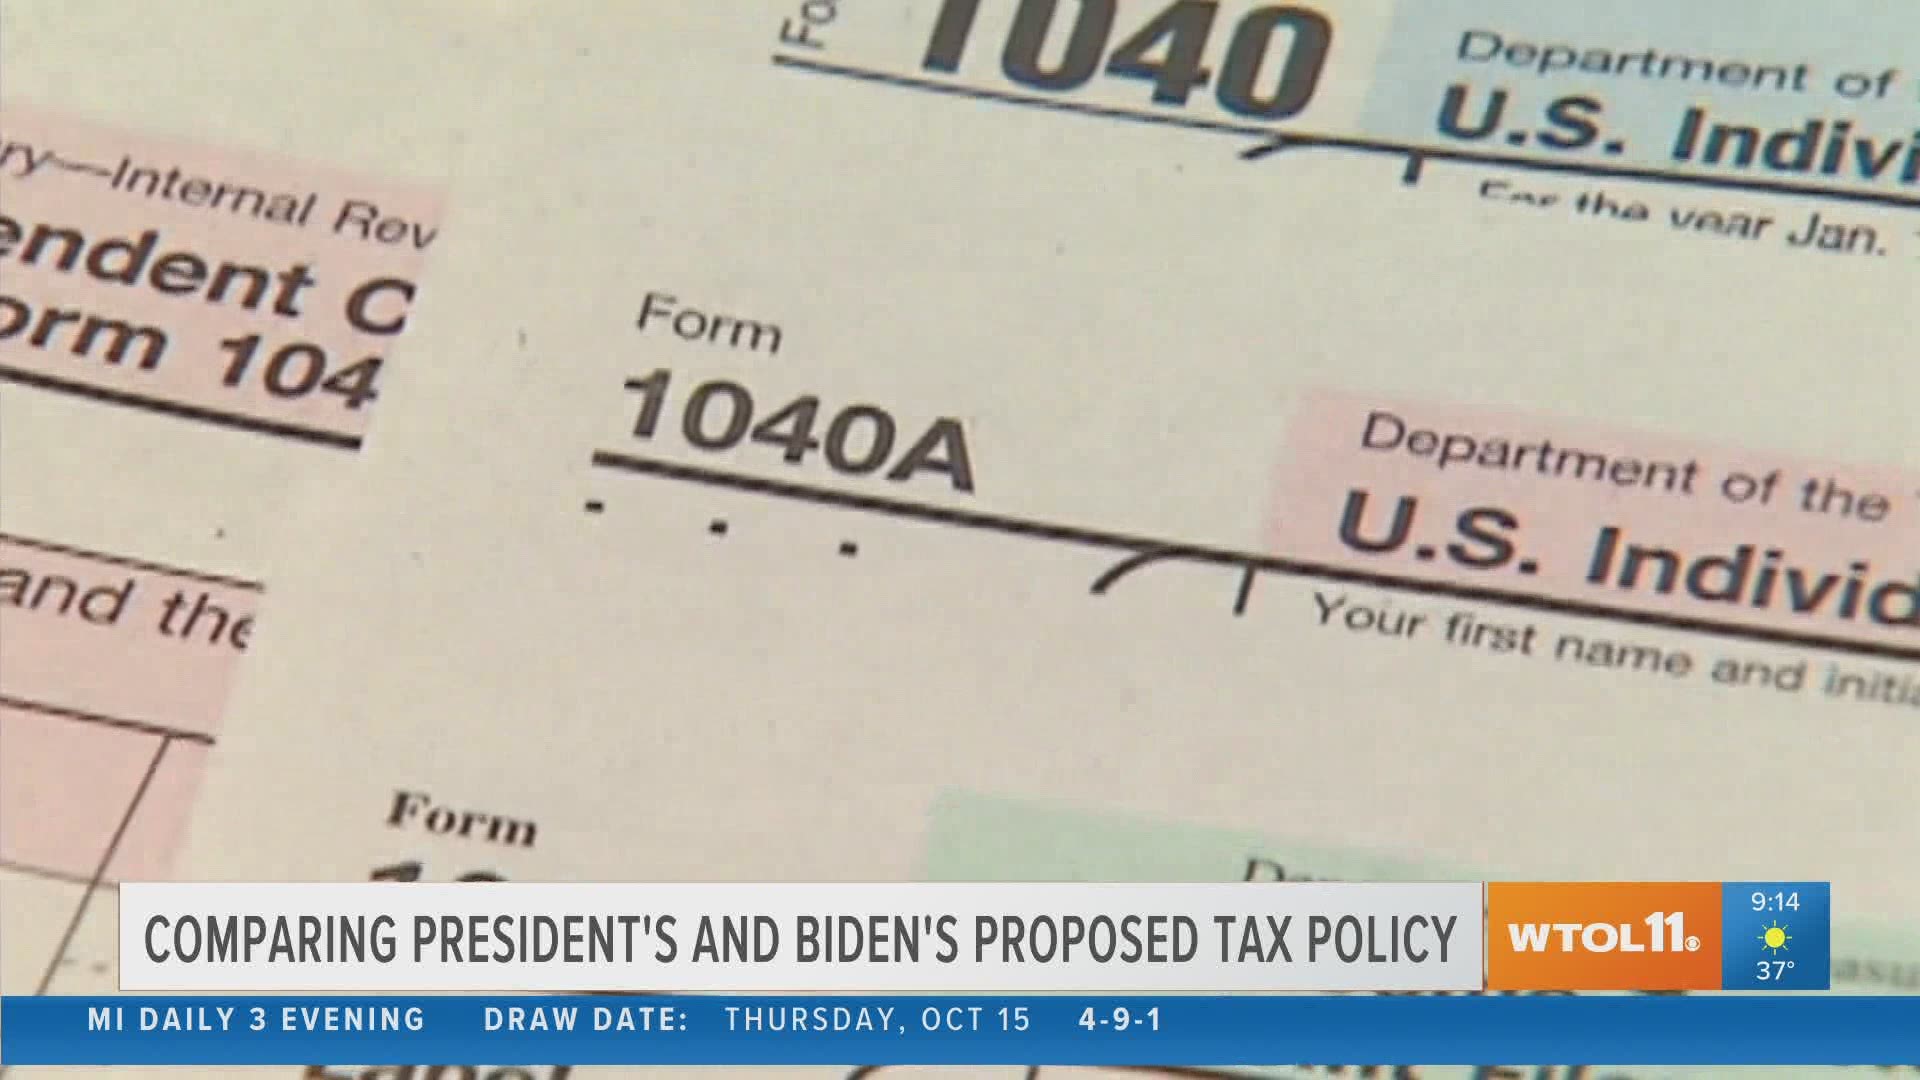 Gilmore, Jasion and Mahler break down where the president and former vice president stand on proposed tax policies